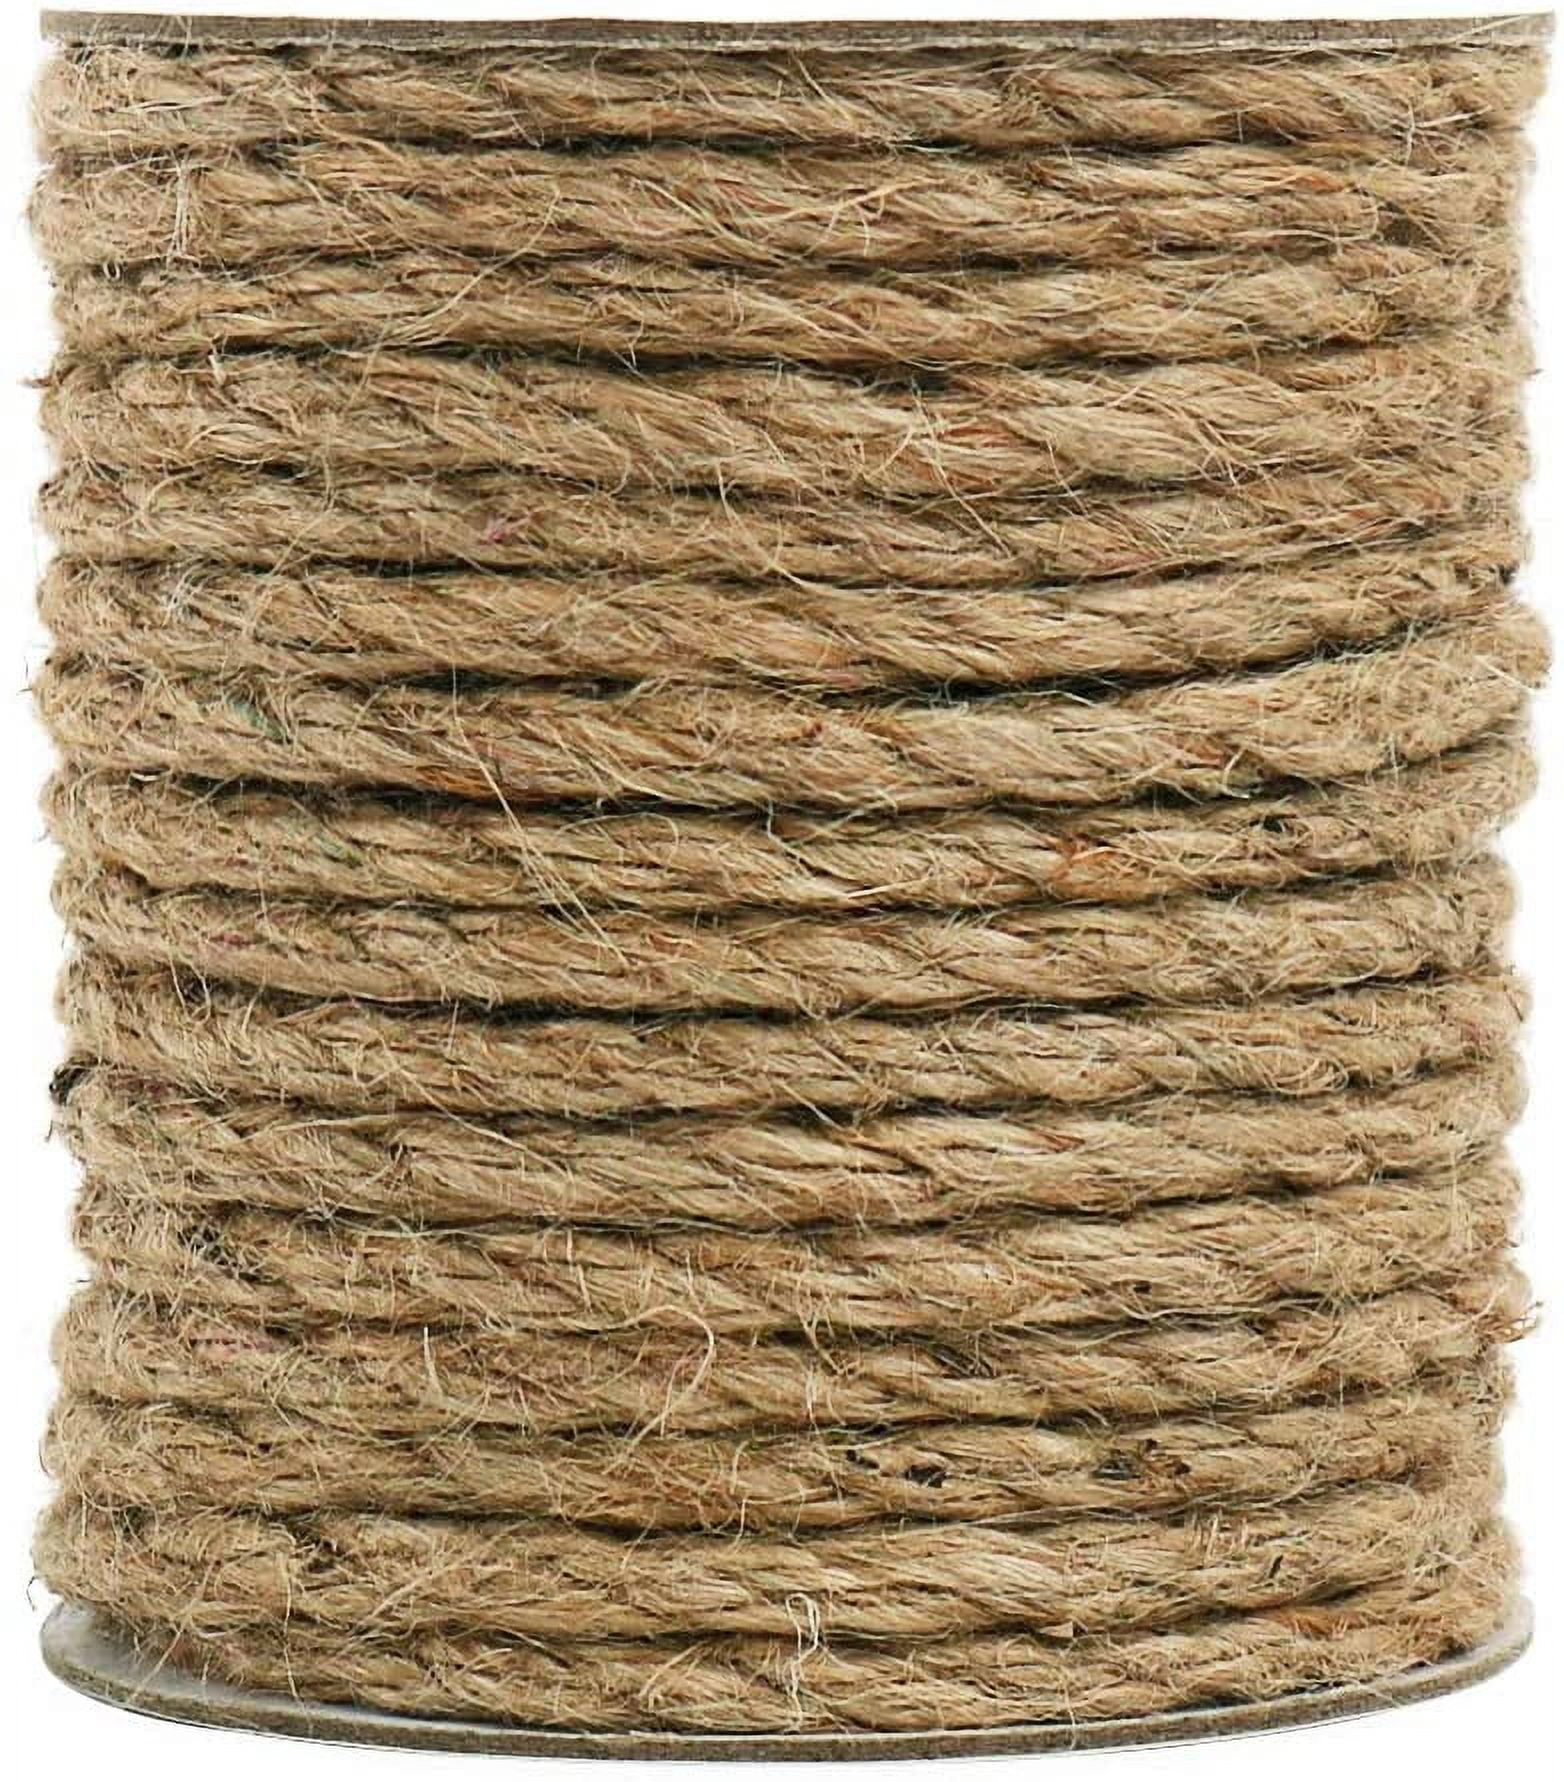 165 Feet 4mm Jute Twine Thick Natural Jute Rope for Crafts, Garden